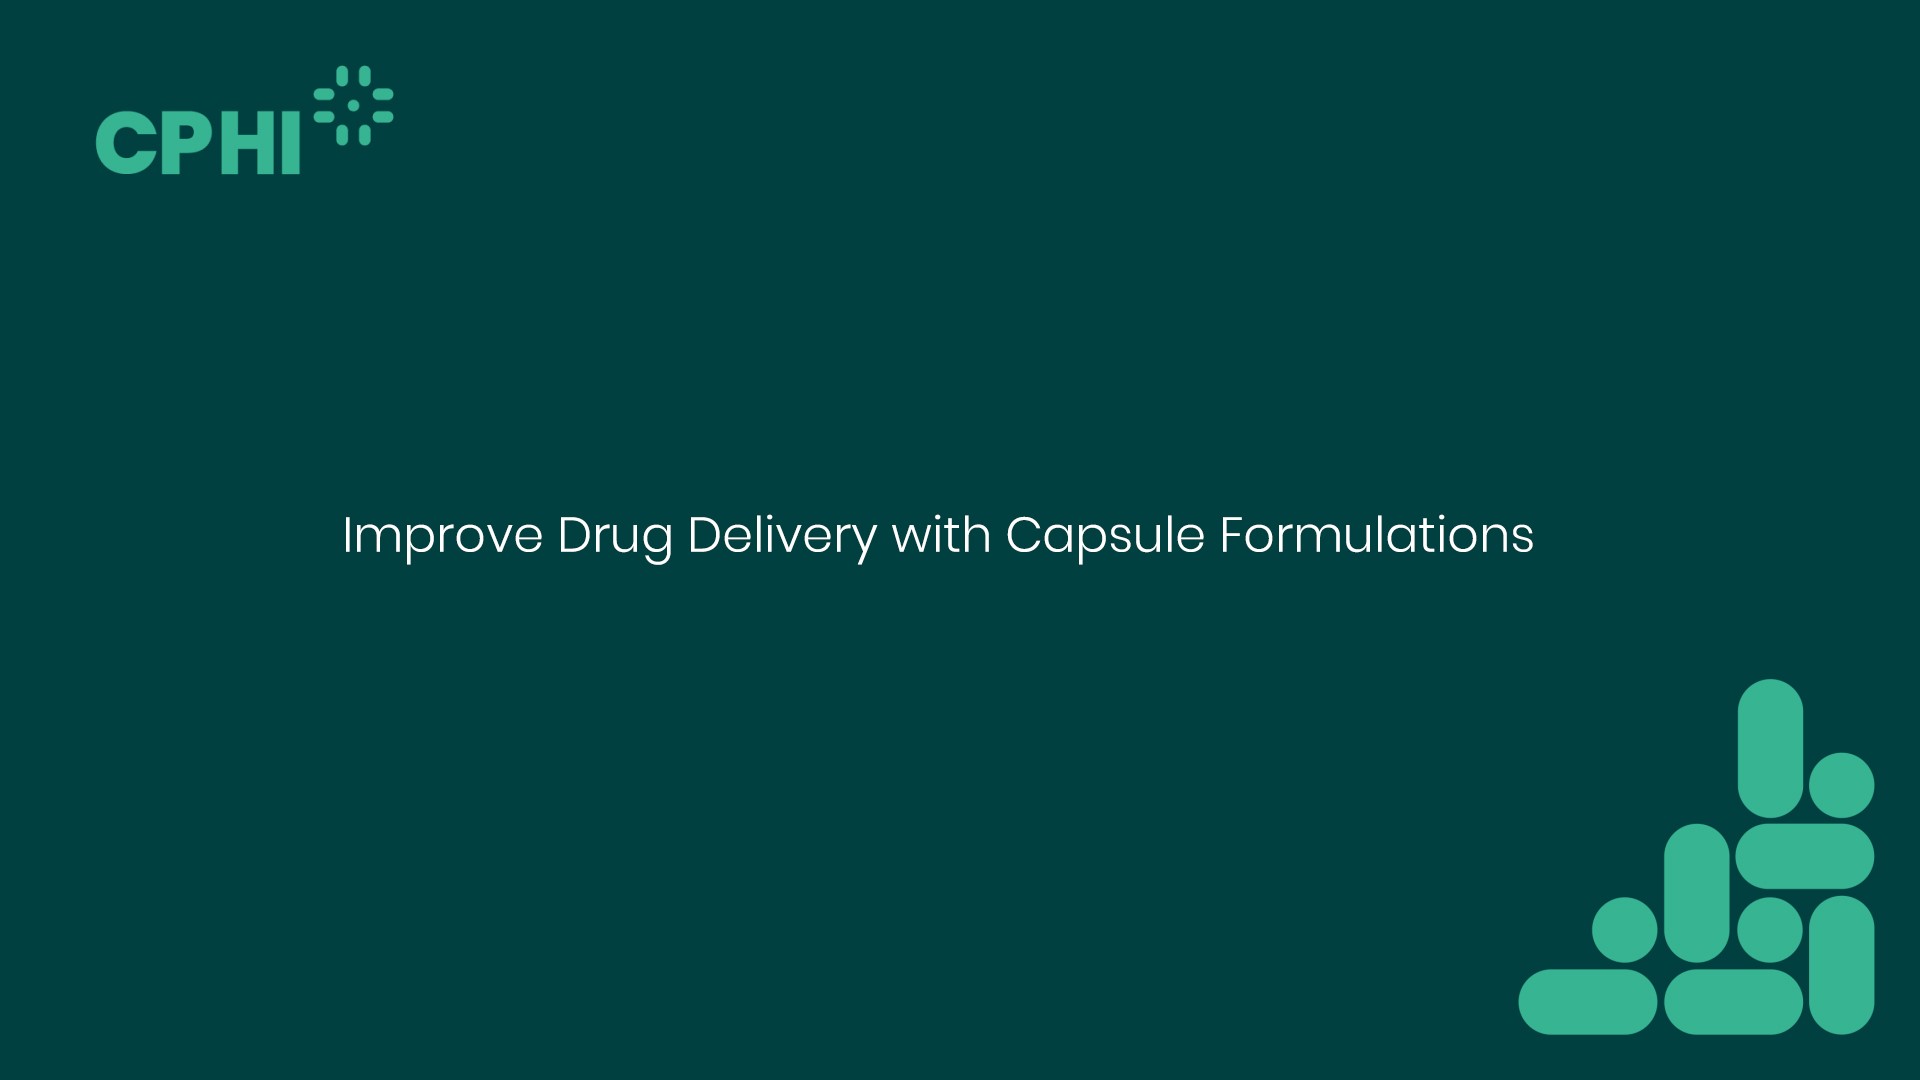 Improve Drug Delivery with Capsule Formulations